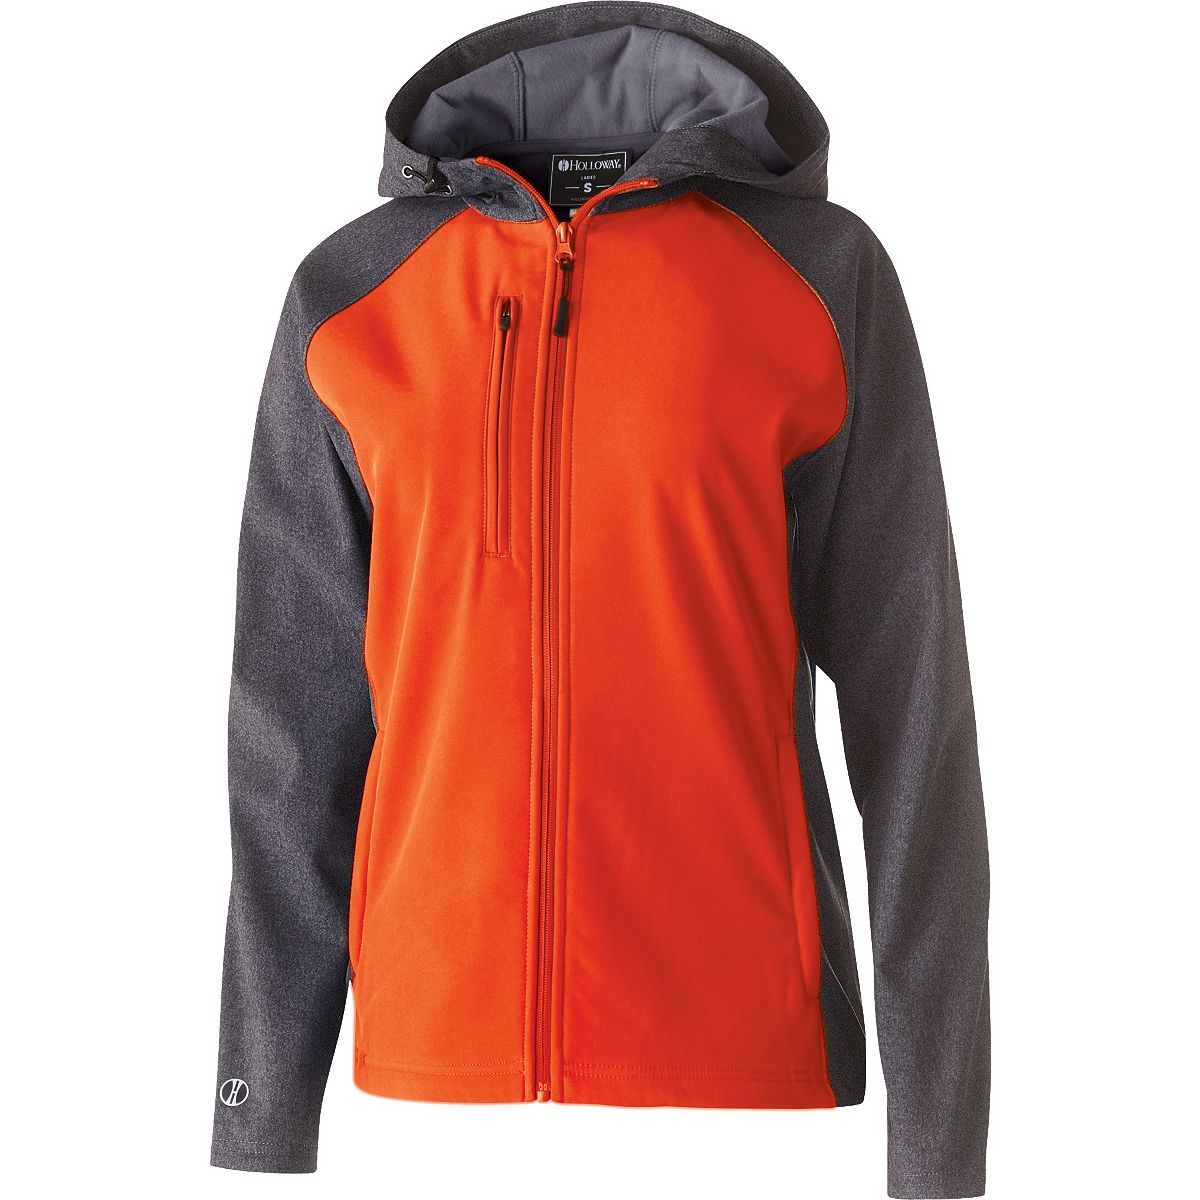 Holloway Ladies Raider Softshell Jacket in Carbon Print/Orange  -Part of the Ladies, Ladies-Jacket, Holloway, Outerwear product lines at KanaleyCreations.com